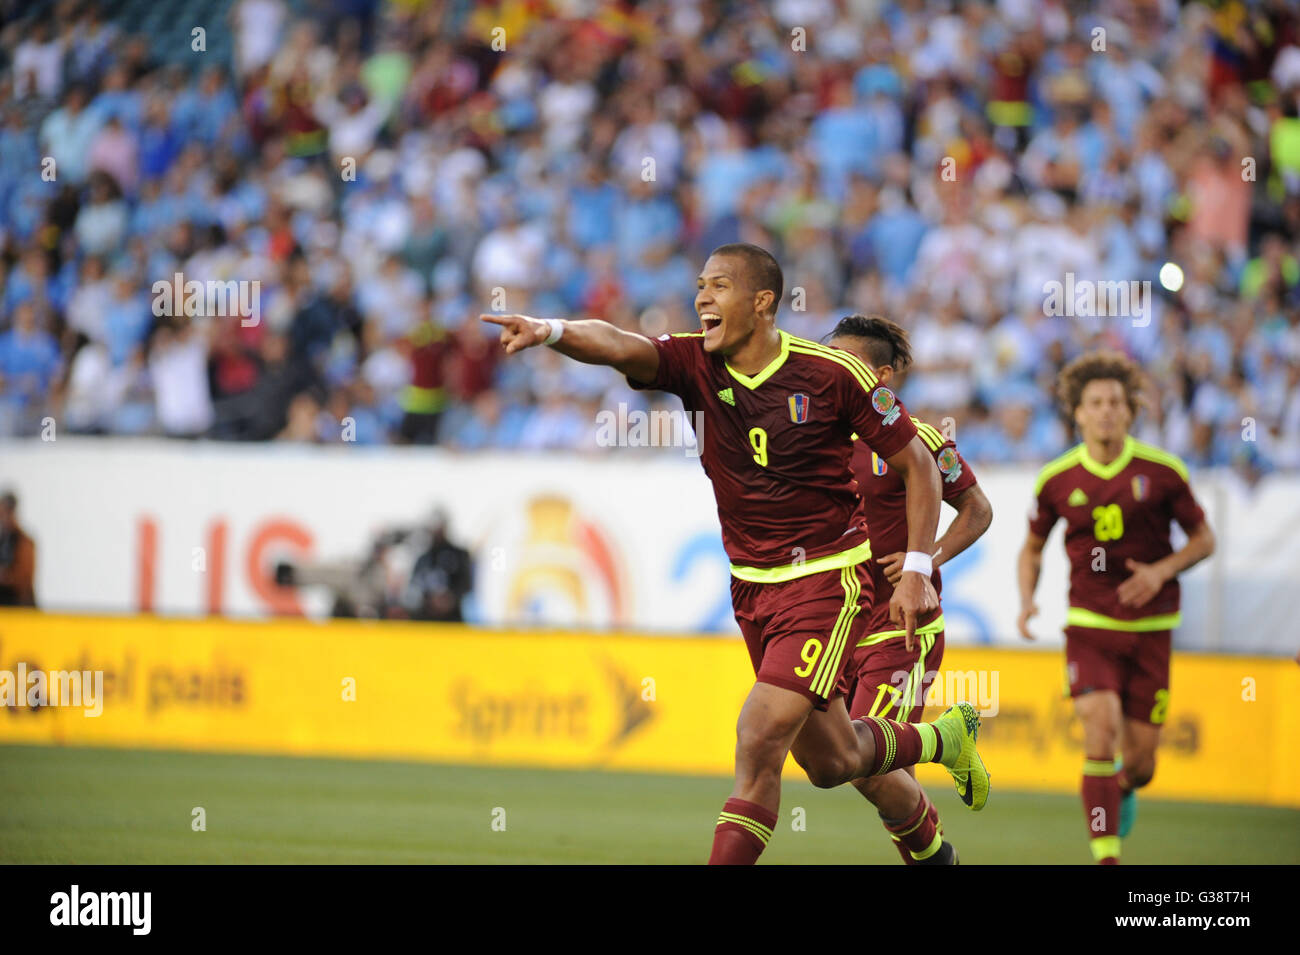 Philadelphia, Pennsylvania, USA. 9th June, 2016. SALMON RONDON (9) of Venezuela celebrates after scoring a goal against Uruguay during the Copa America match held at Lincoln Financial Field. Credit:  Ricky Fitchett/ZUMA Wire/Alamy Live News Stock Photo